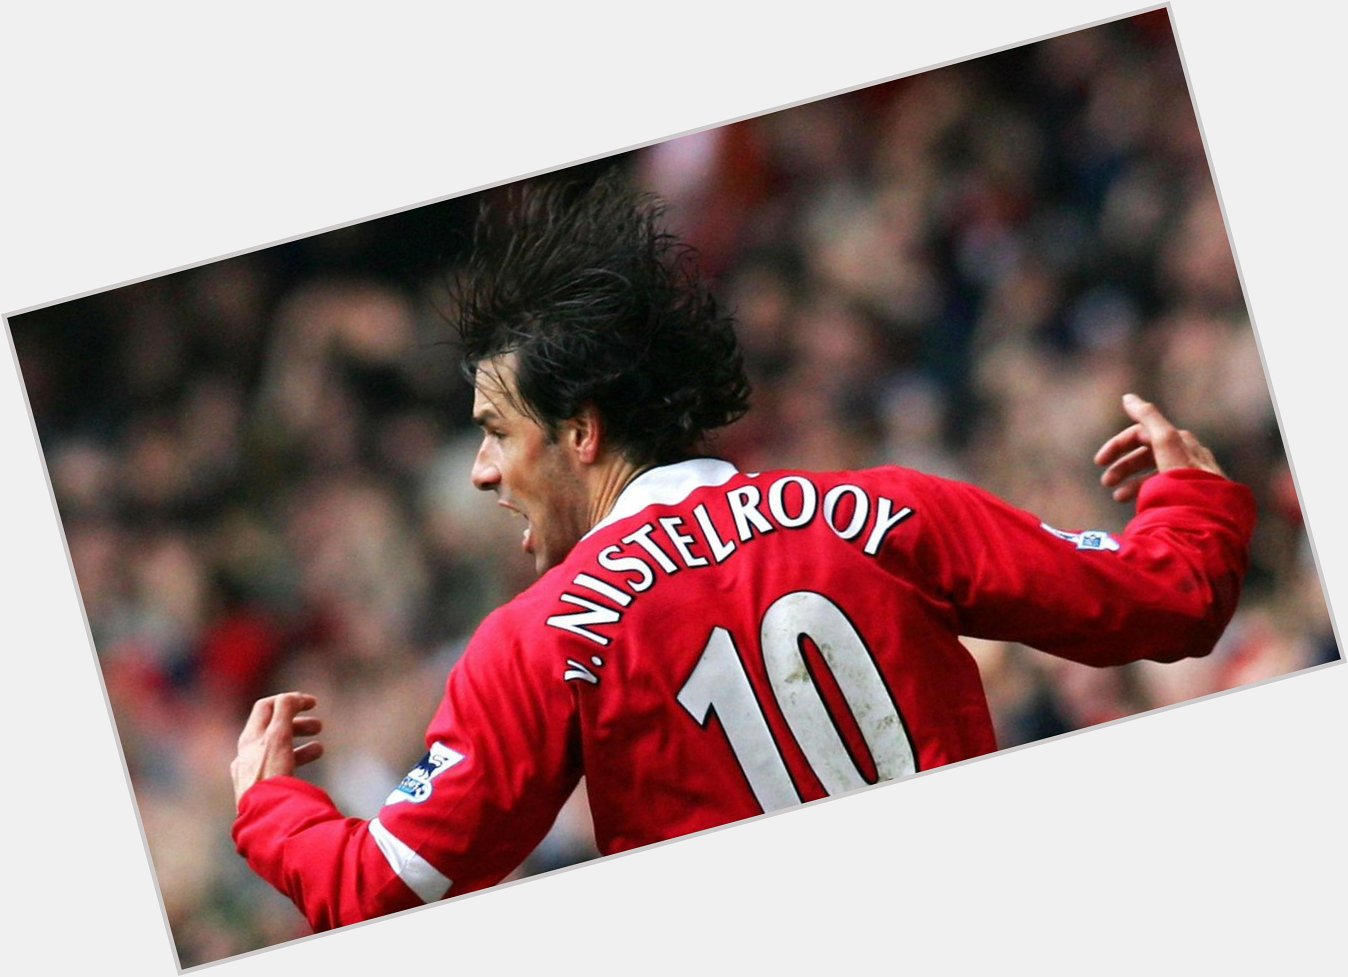 GO GO NISTELROOY  \" Happy 39th birthday to ex-Manchester United striker, Ruud van Nistelrooy! 